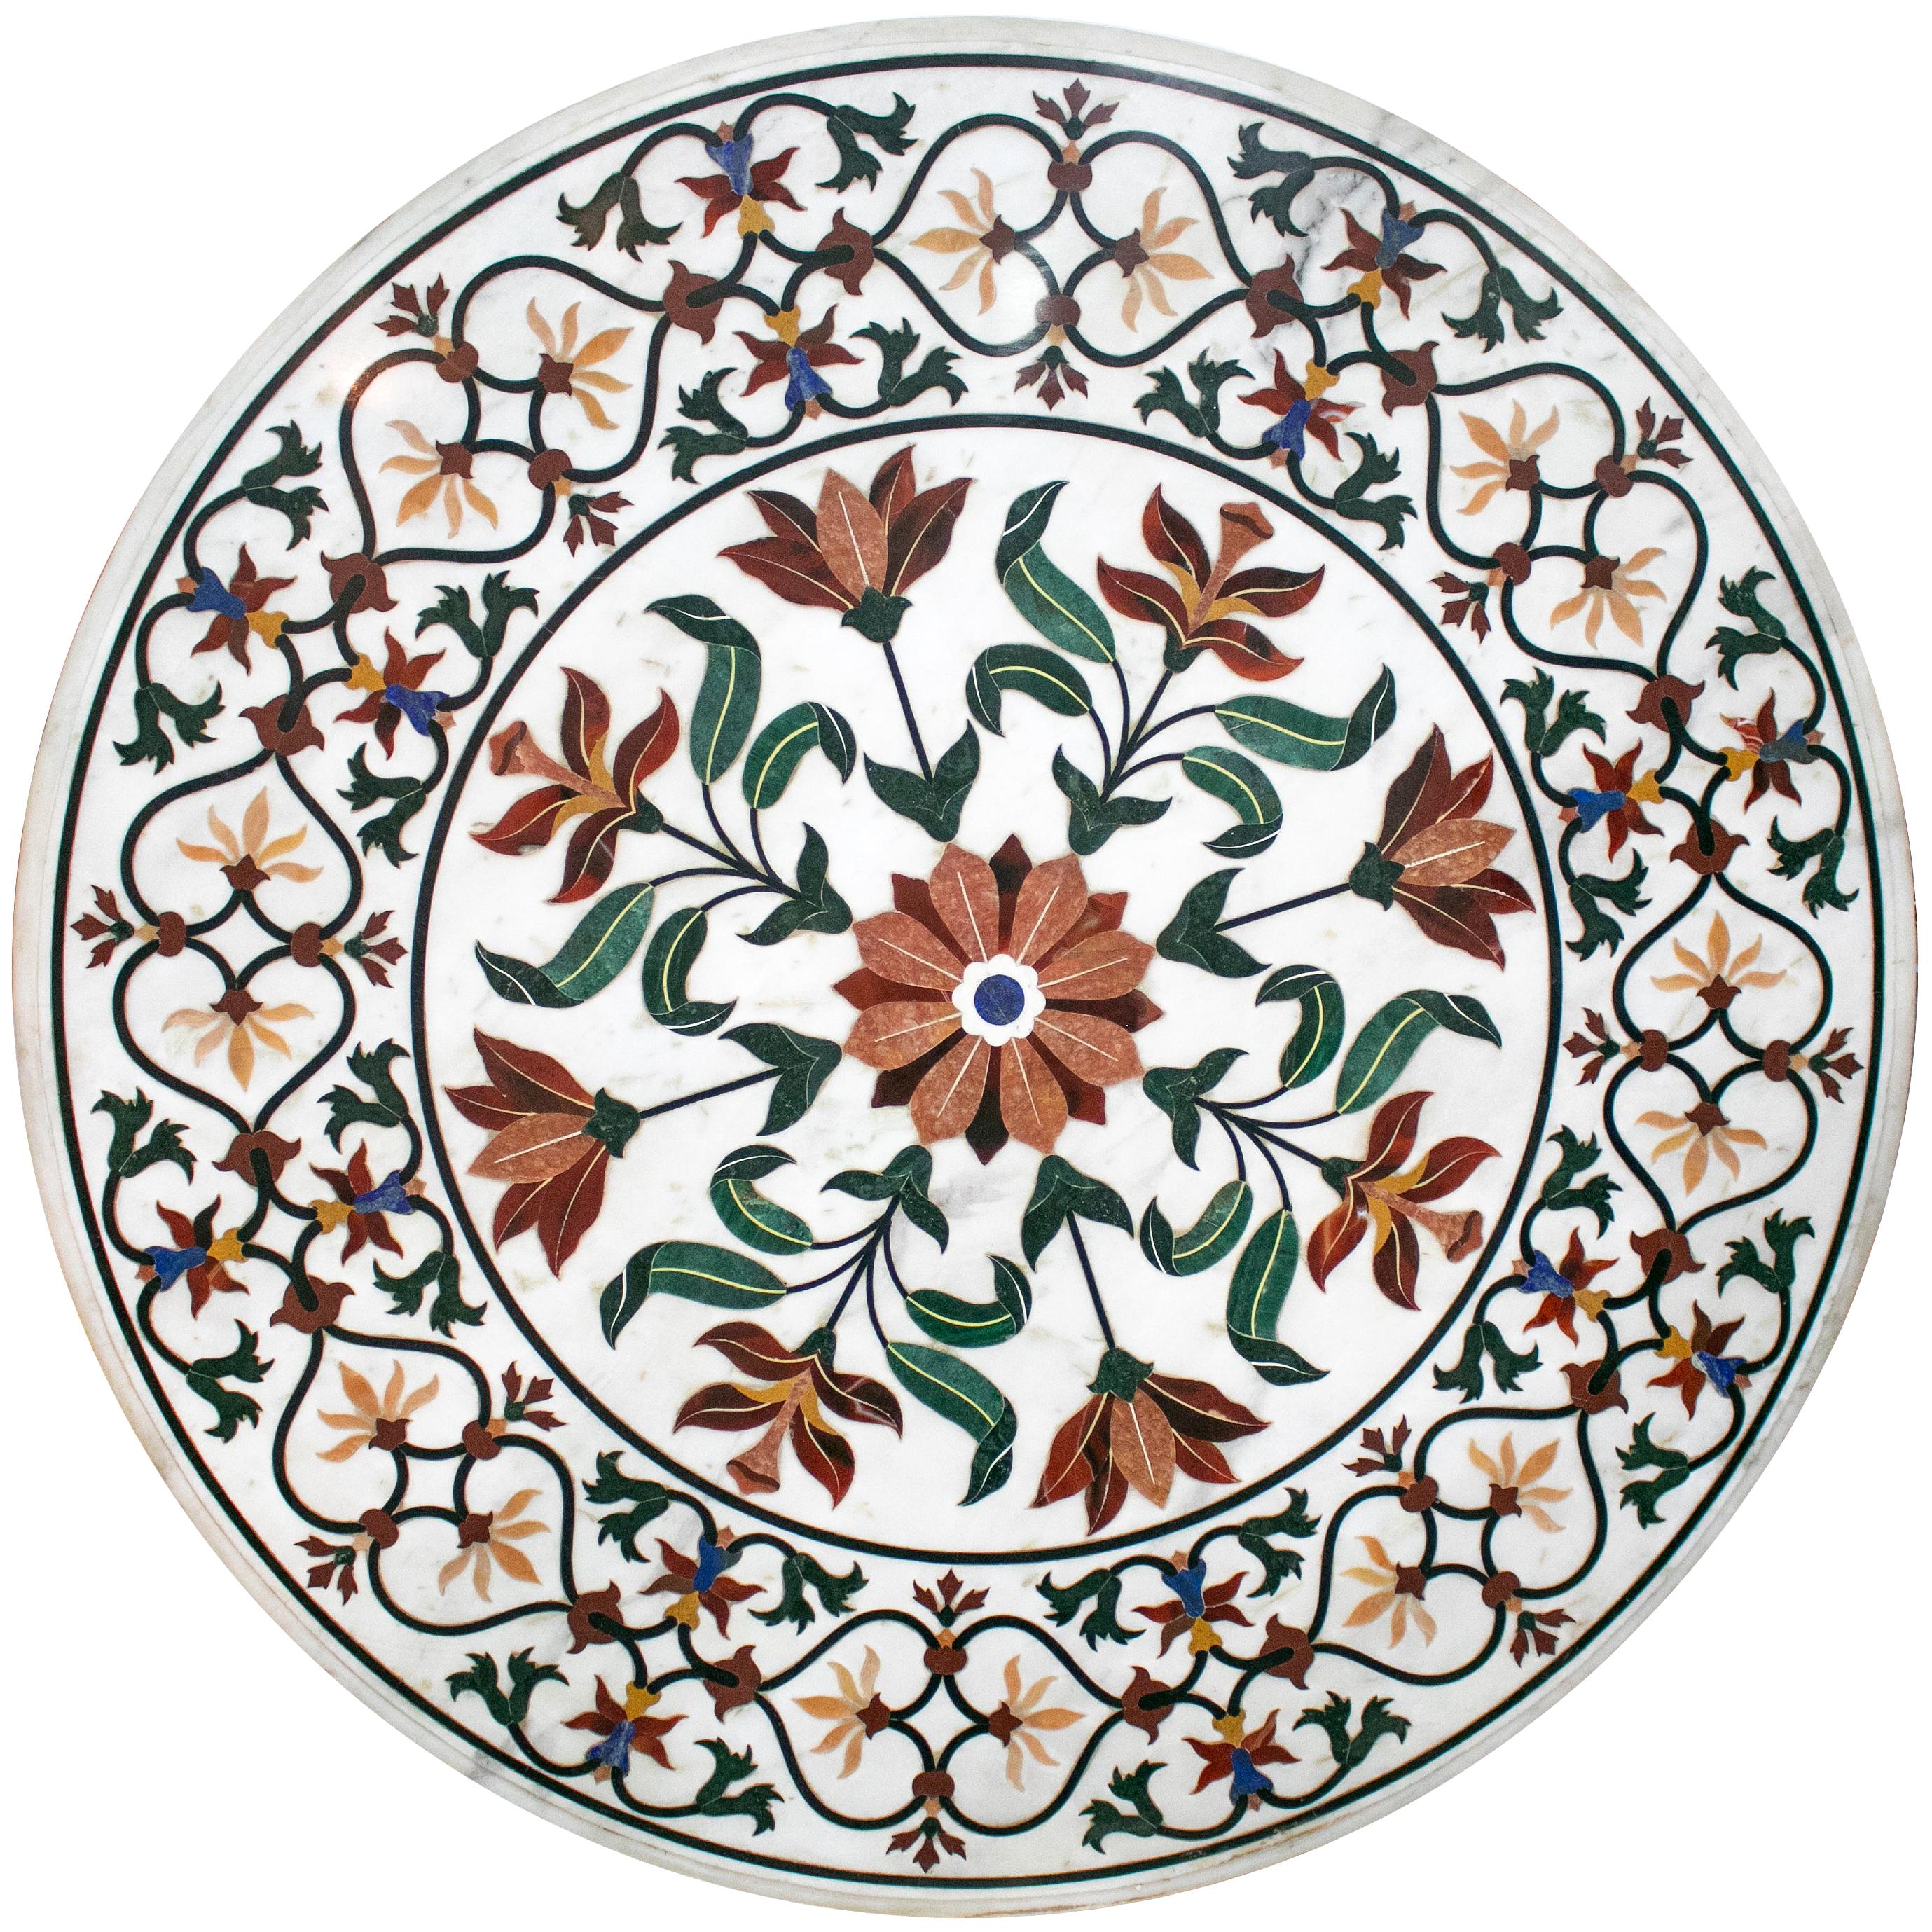 Details about   Marble Table Coffee Top Hakik Floral Special Inlay Occasion Outdoor Decor H3507 